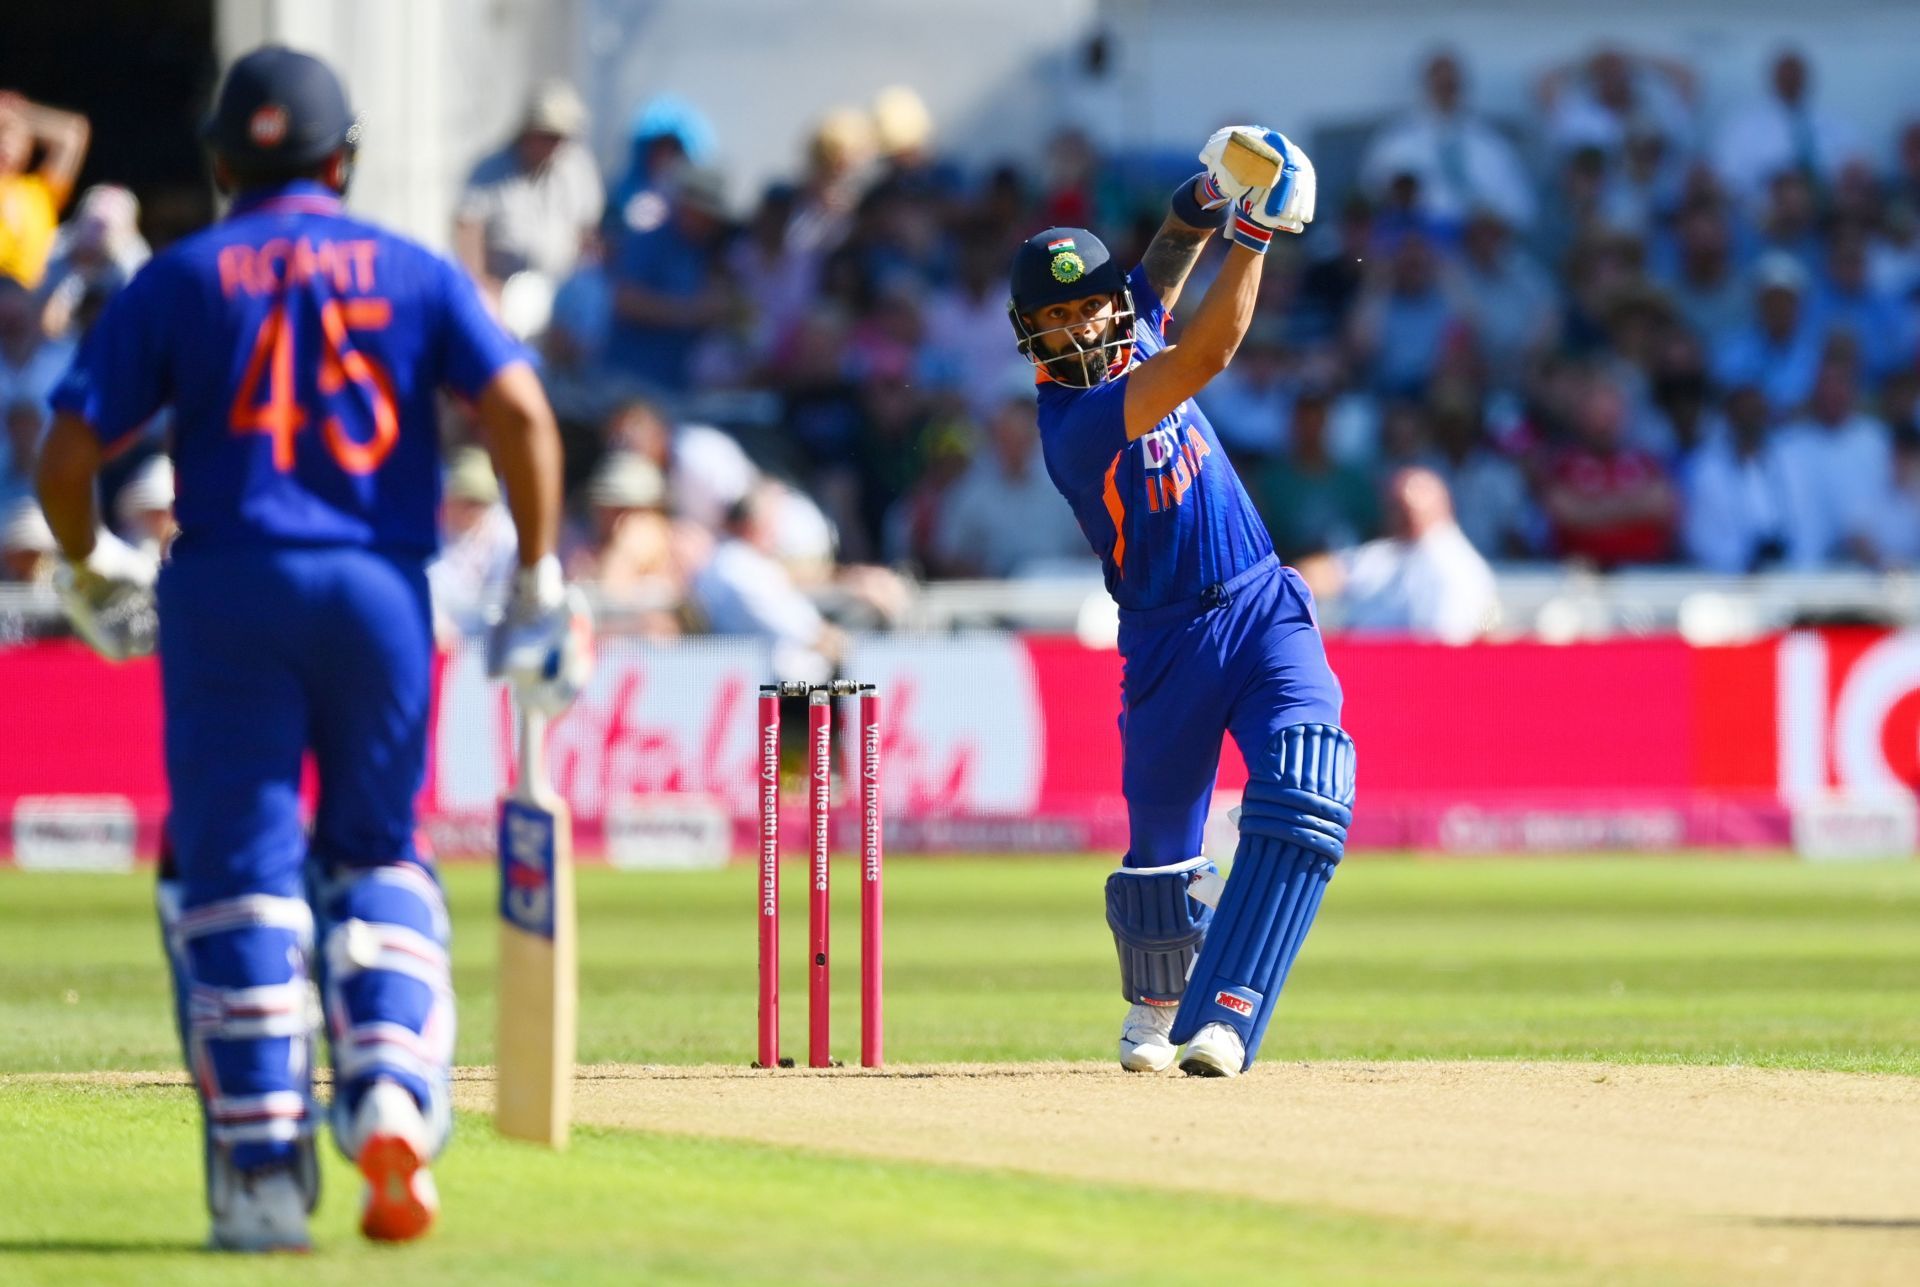 The upcoming third ODI against England will be crucial for Virat Kohli